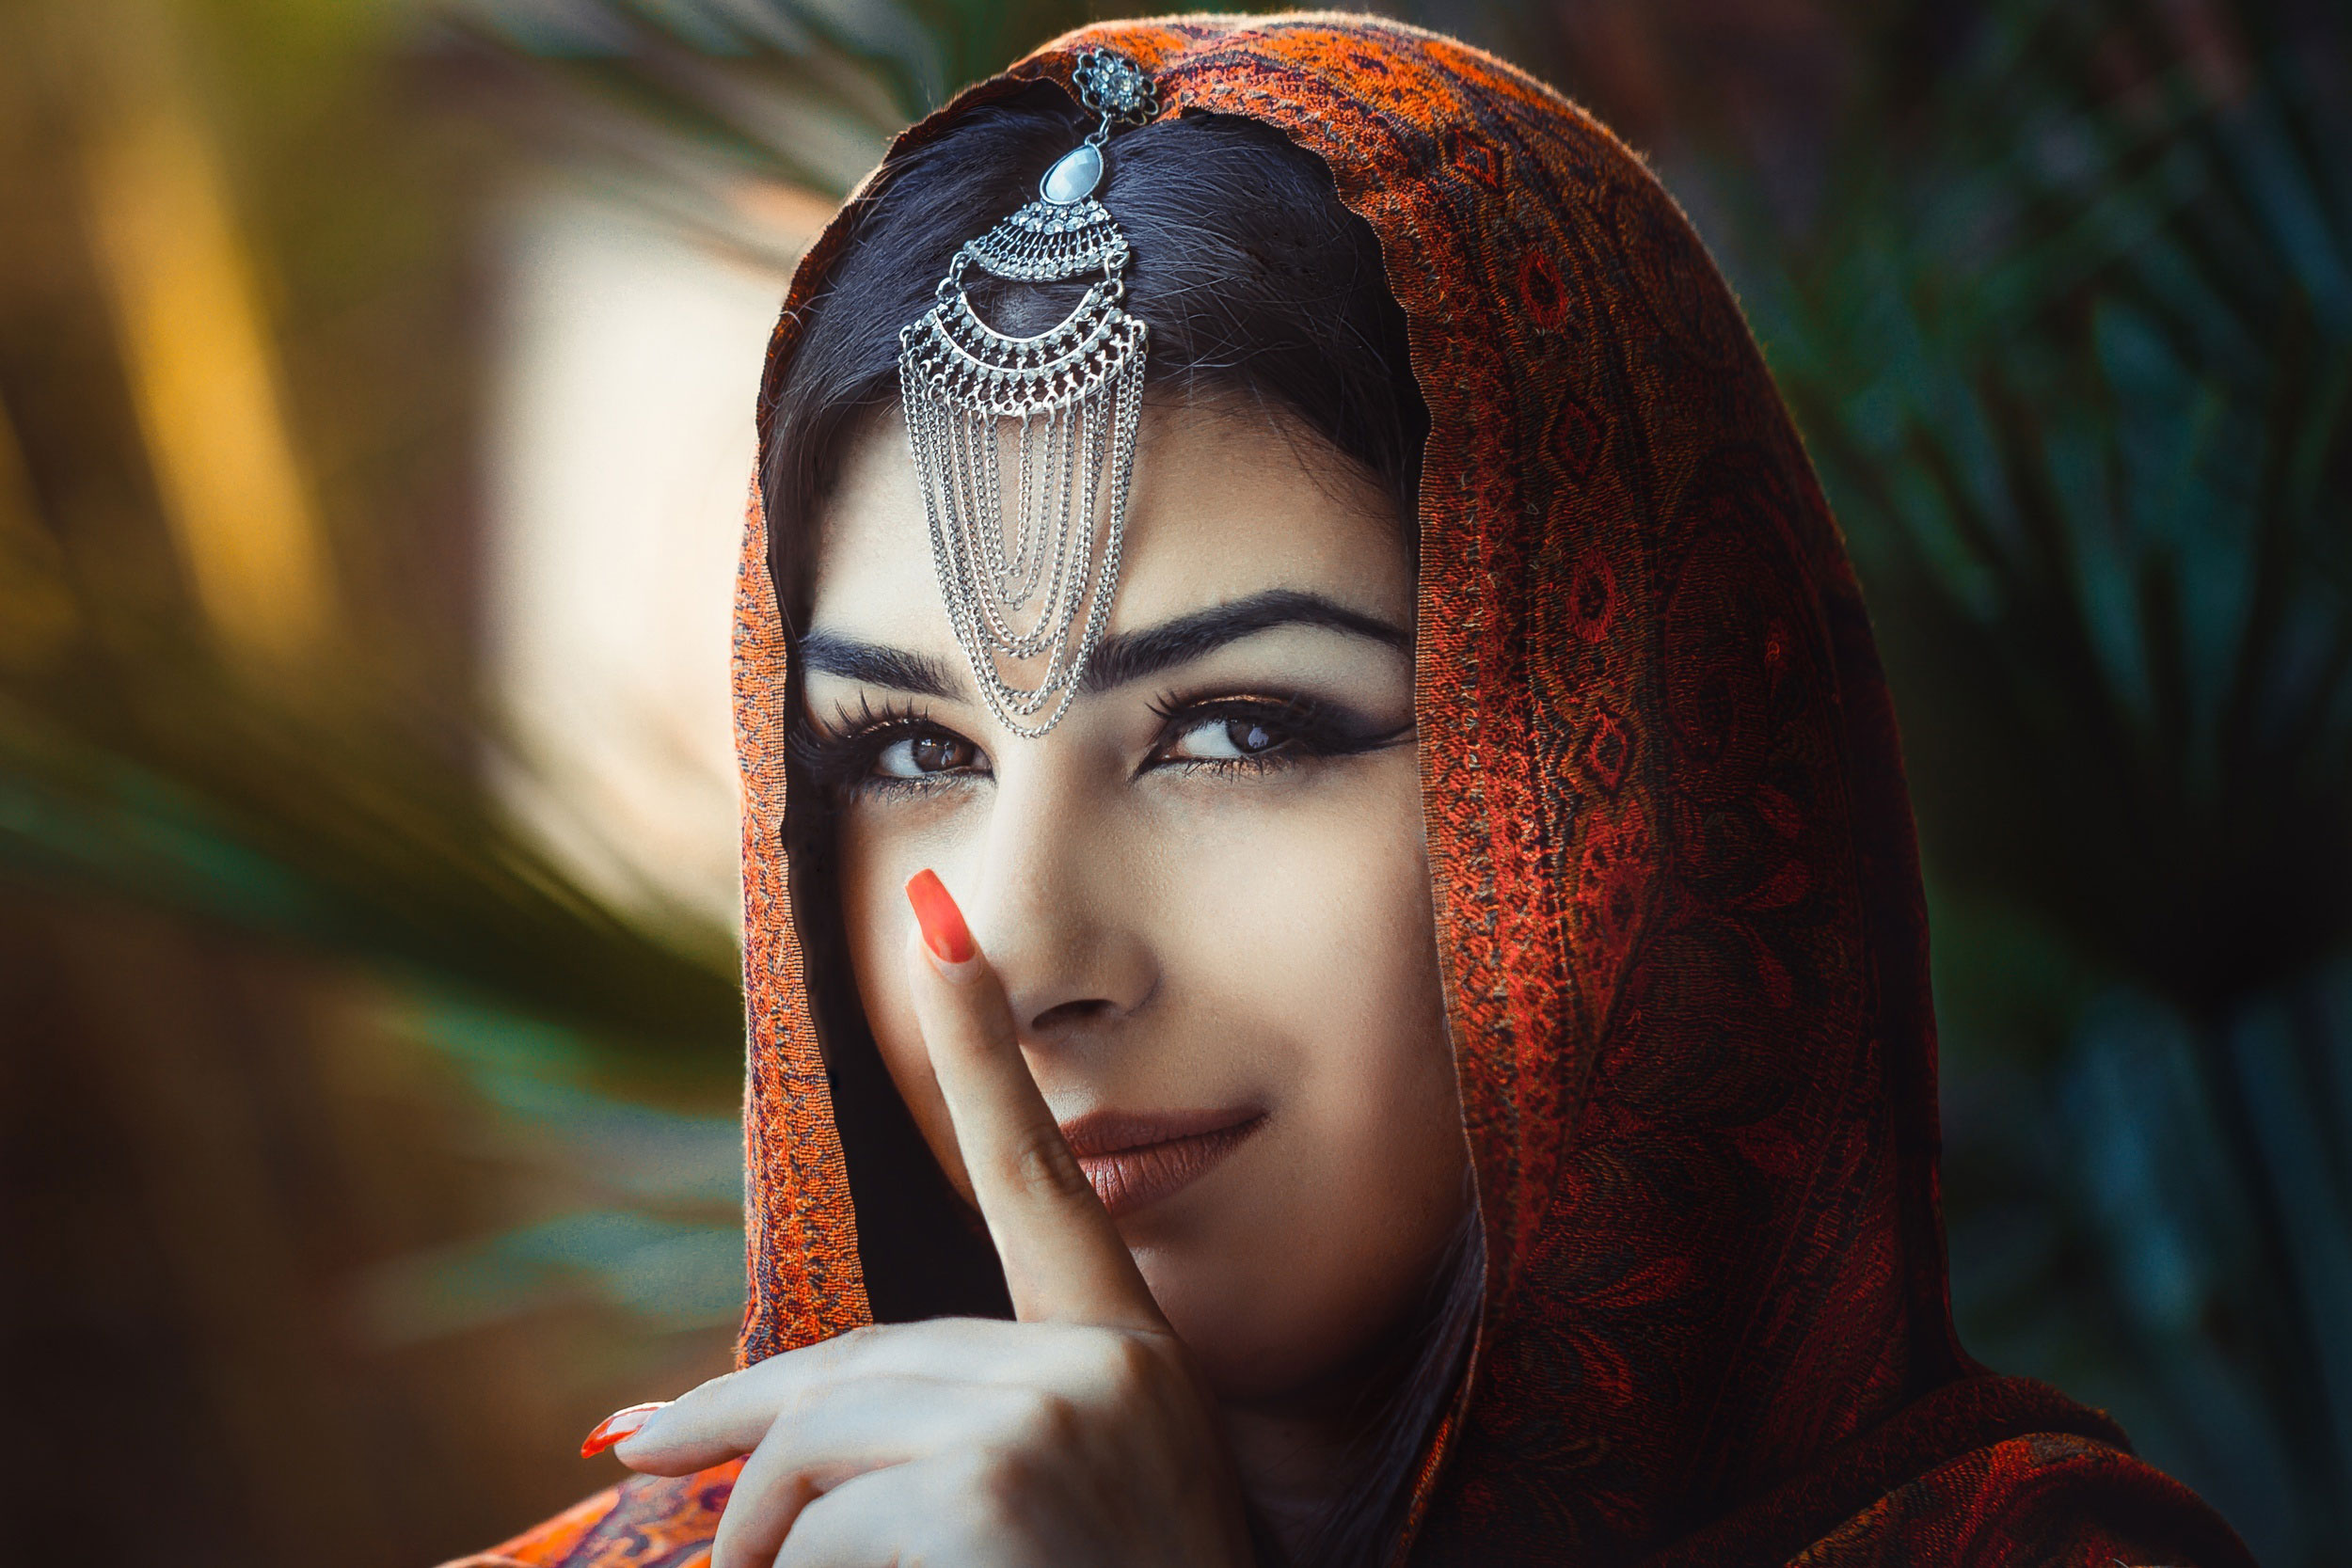 A beautiful woman wearing traditional Indian dress and a red veil